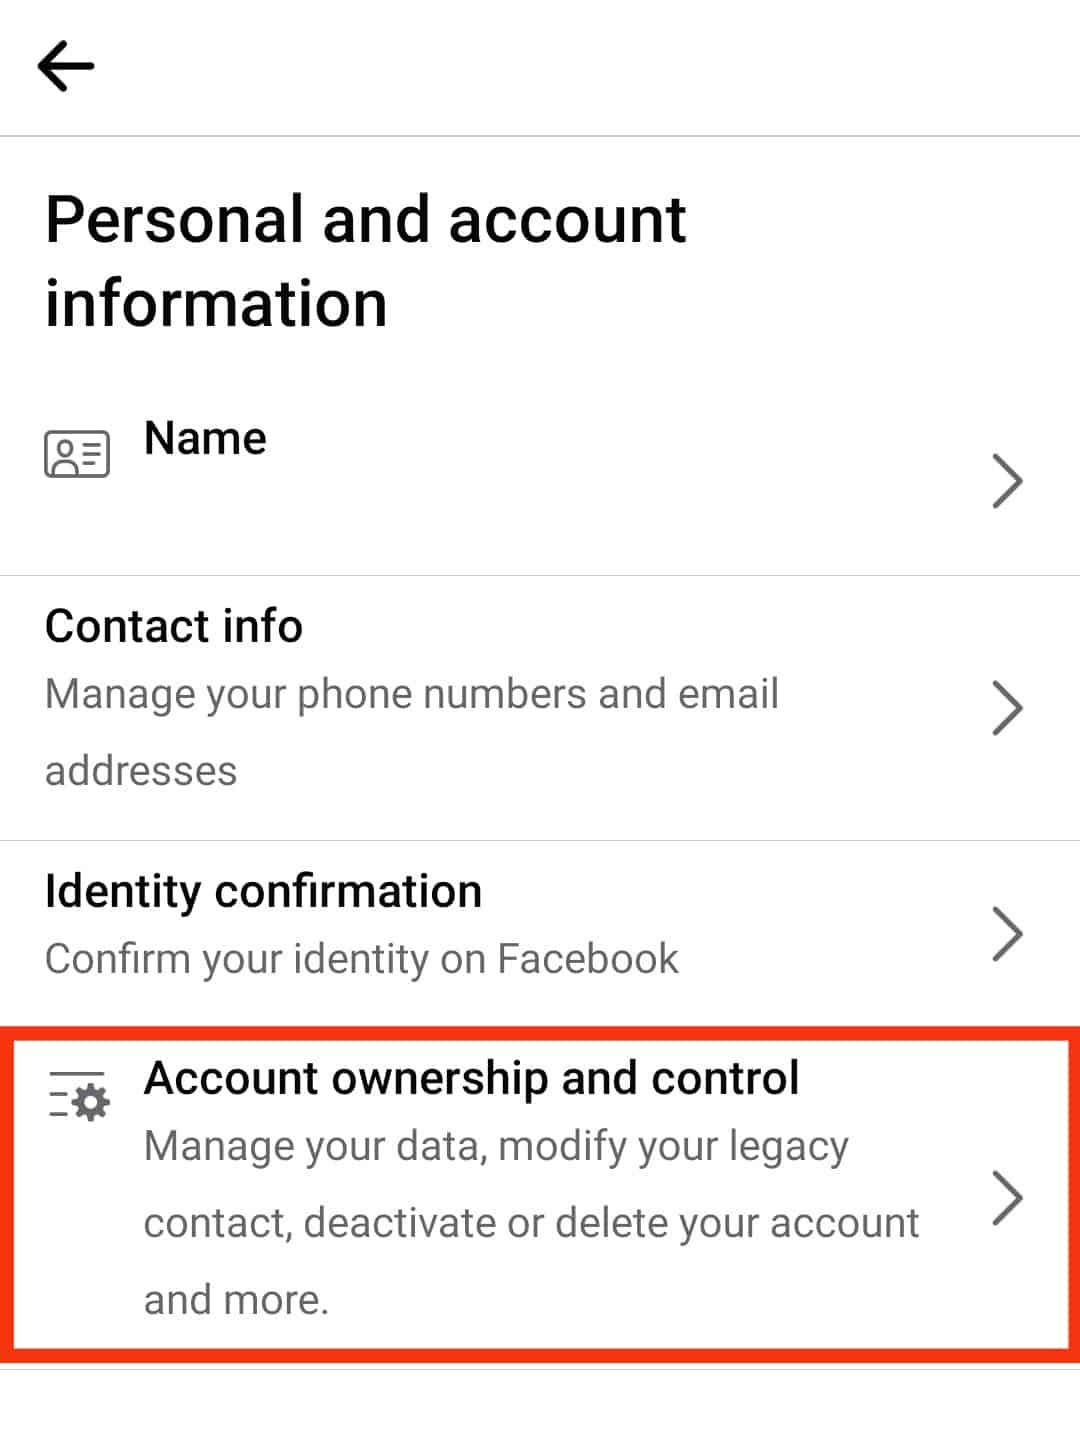 Tap On Account Ownership And Control